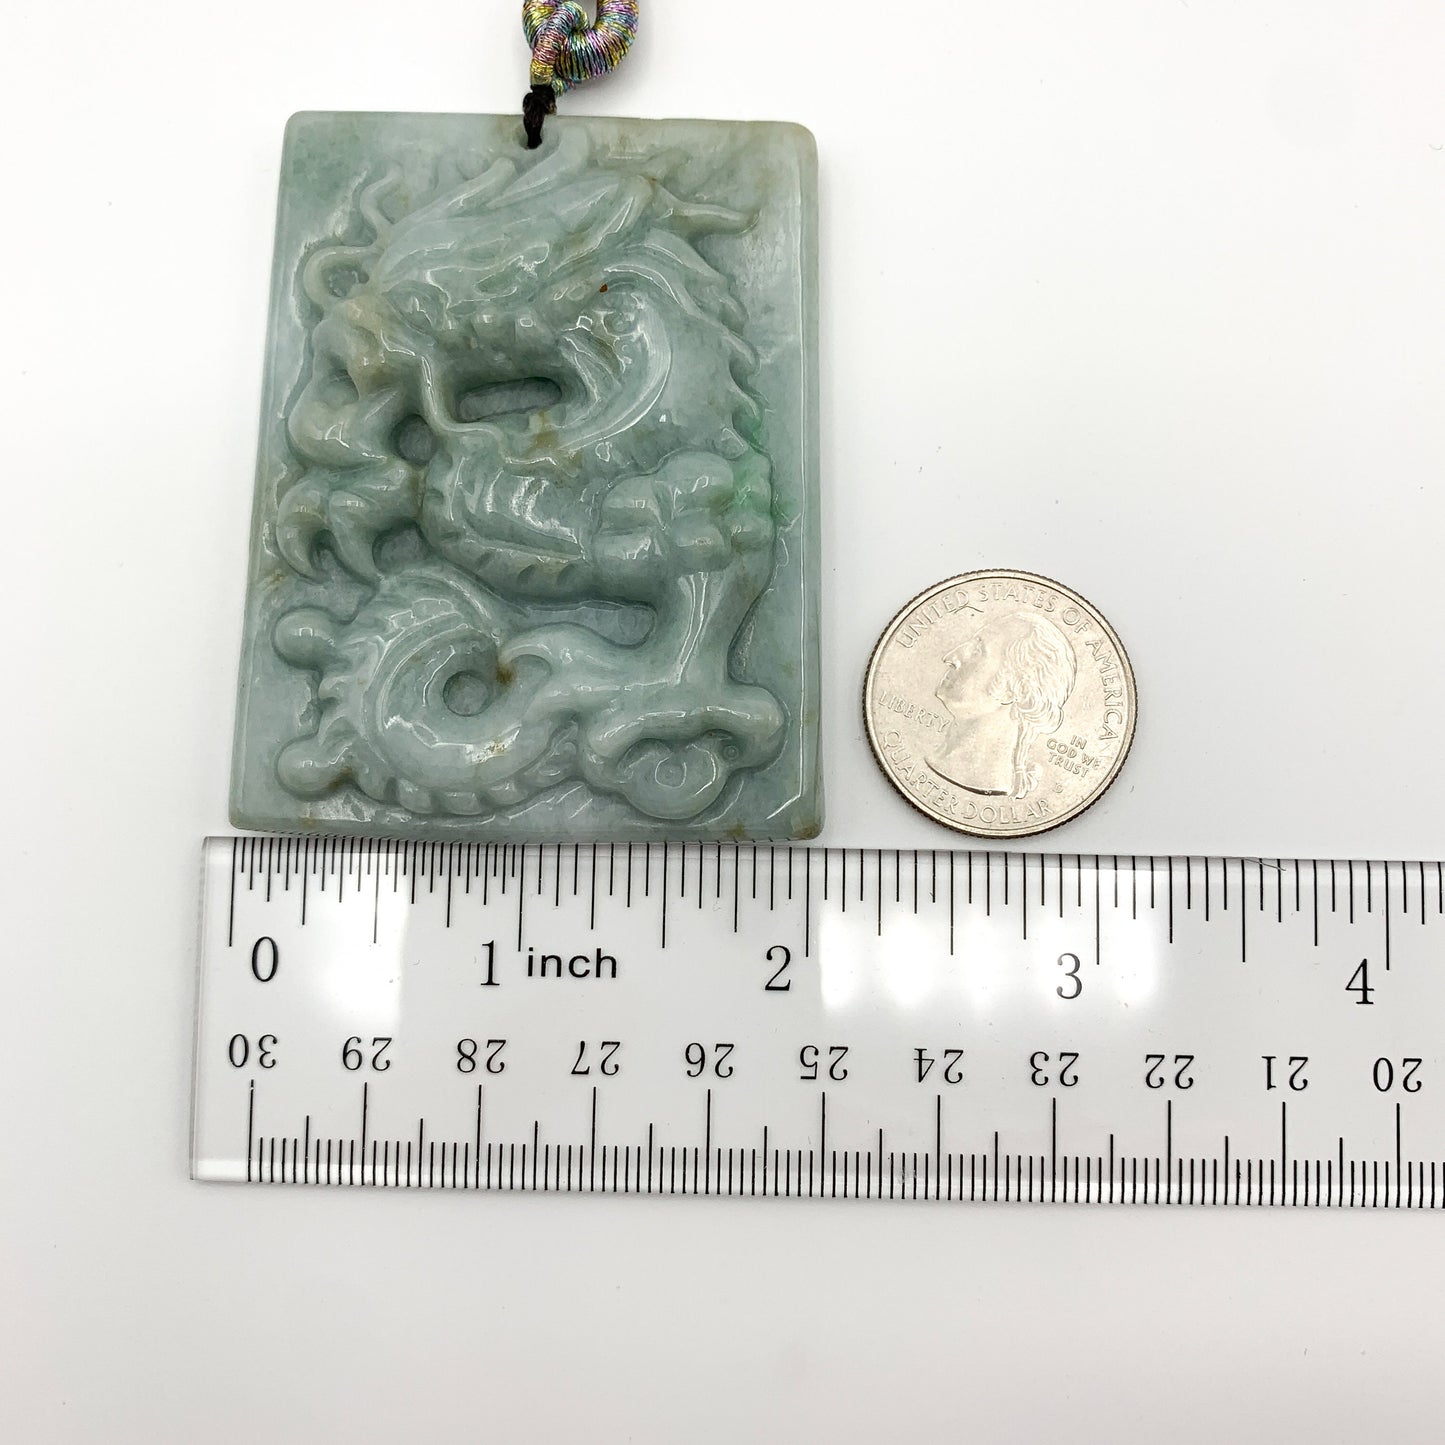 Large Jadeite Jade Dragon Chinese Zodiac Hand Carved Pendant Necklace, YJ-0321-0326620-1 - AriaDesignCollection